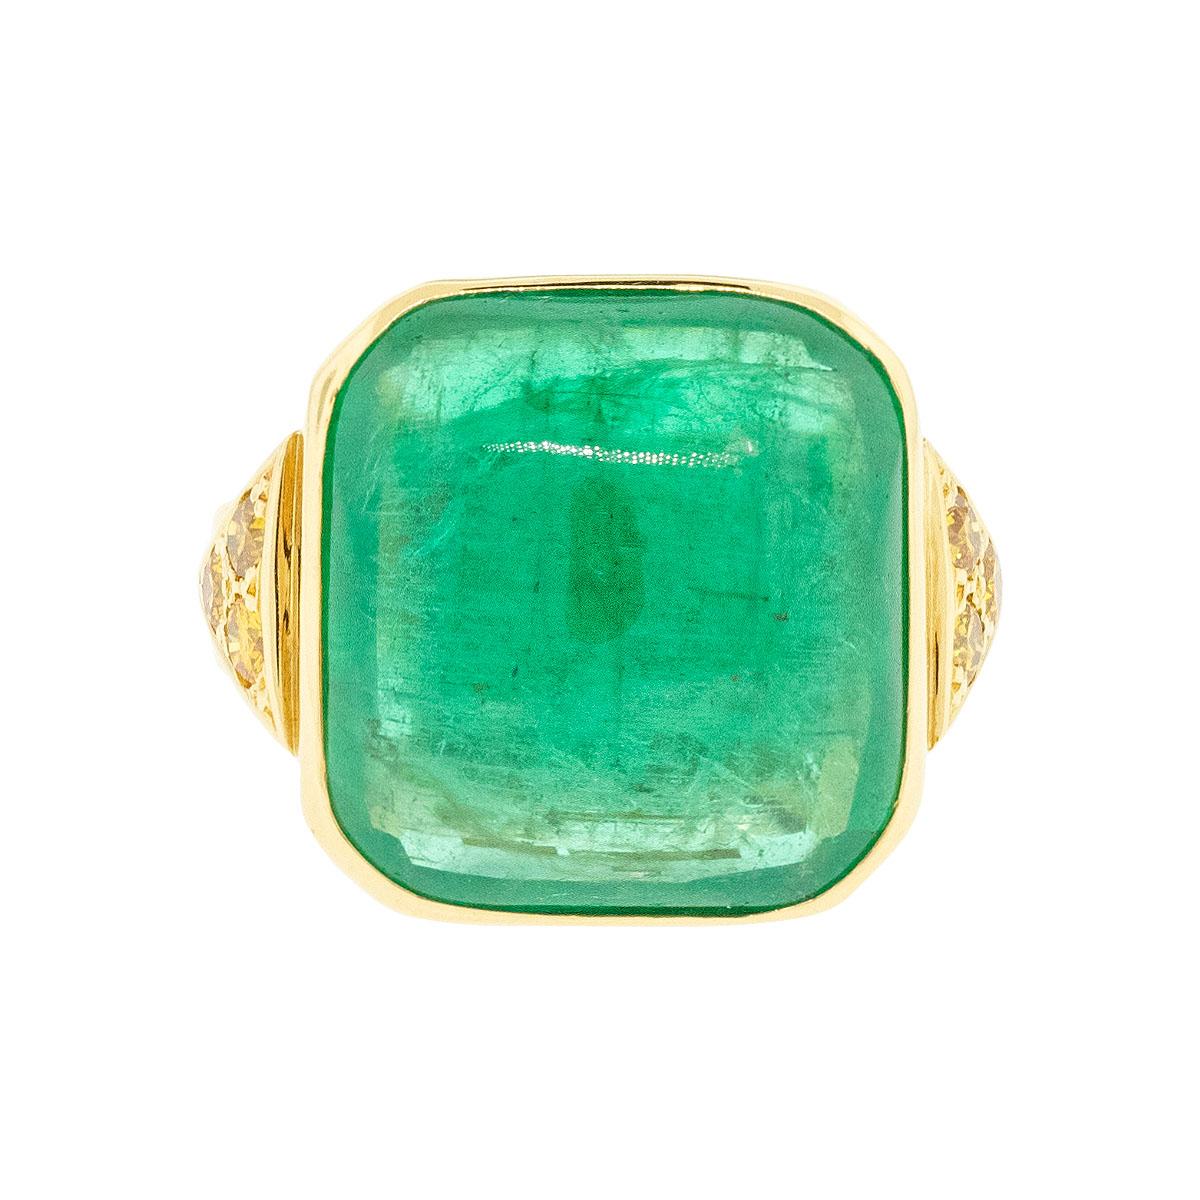 18k Yellow Gold Vintage Emerald Cabochon Ring

When it comes to jewelry, vintage pieces hold a unique charm and story that modern creations simply can't replicate. The 18k Yellow Gold Vintage Emerald Cabochon Ring is no exception. This exquisite